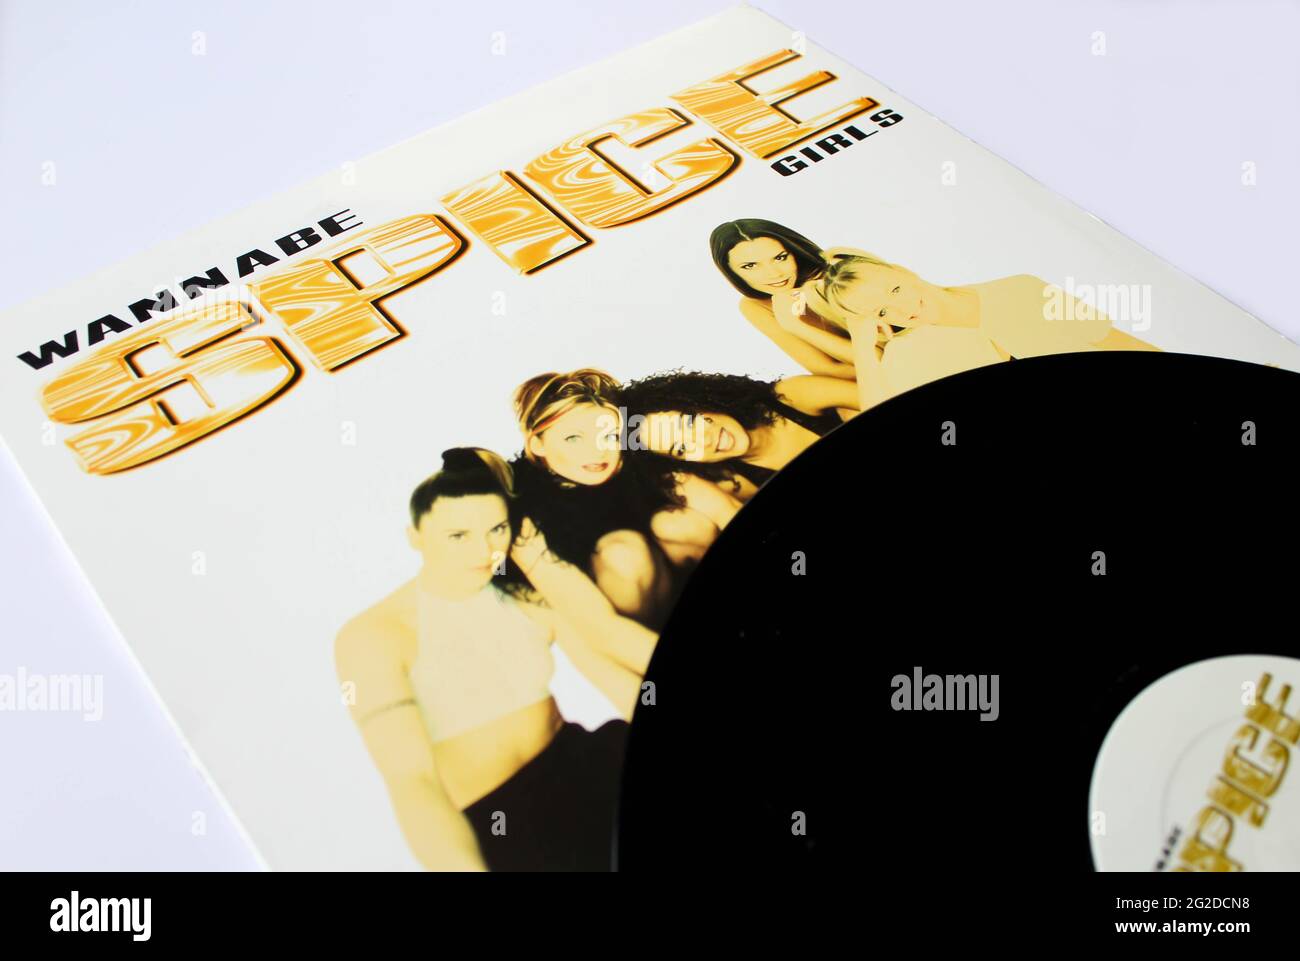 The Spice Girls are an English pop girl band group formed in 1994. Music album on vinyl record LP disc. Titled: Wannabe album cover Stock Photo